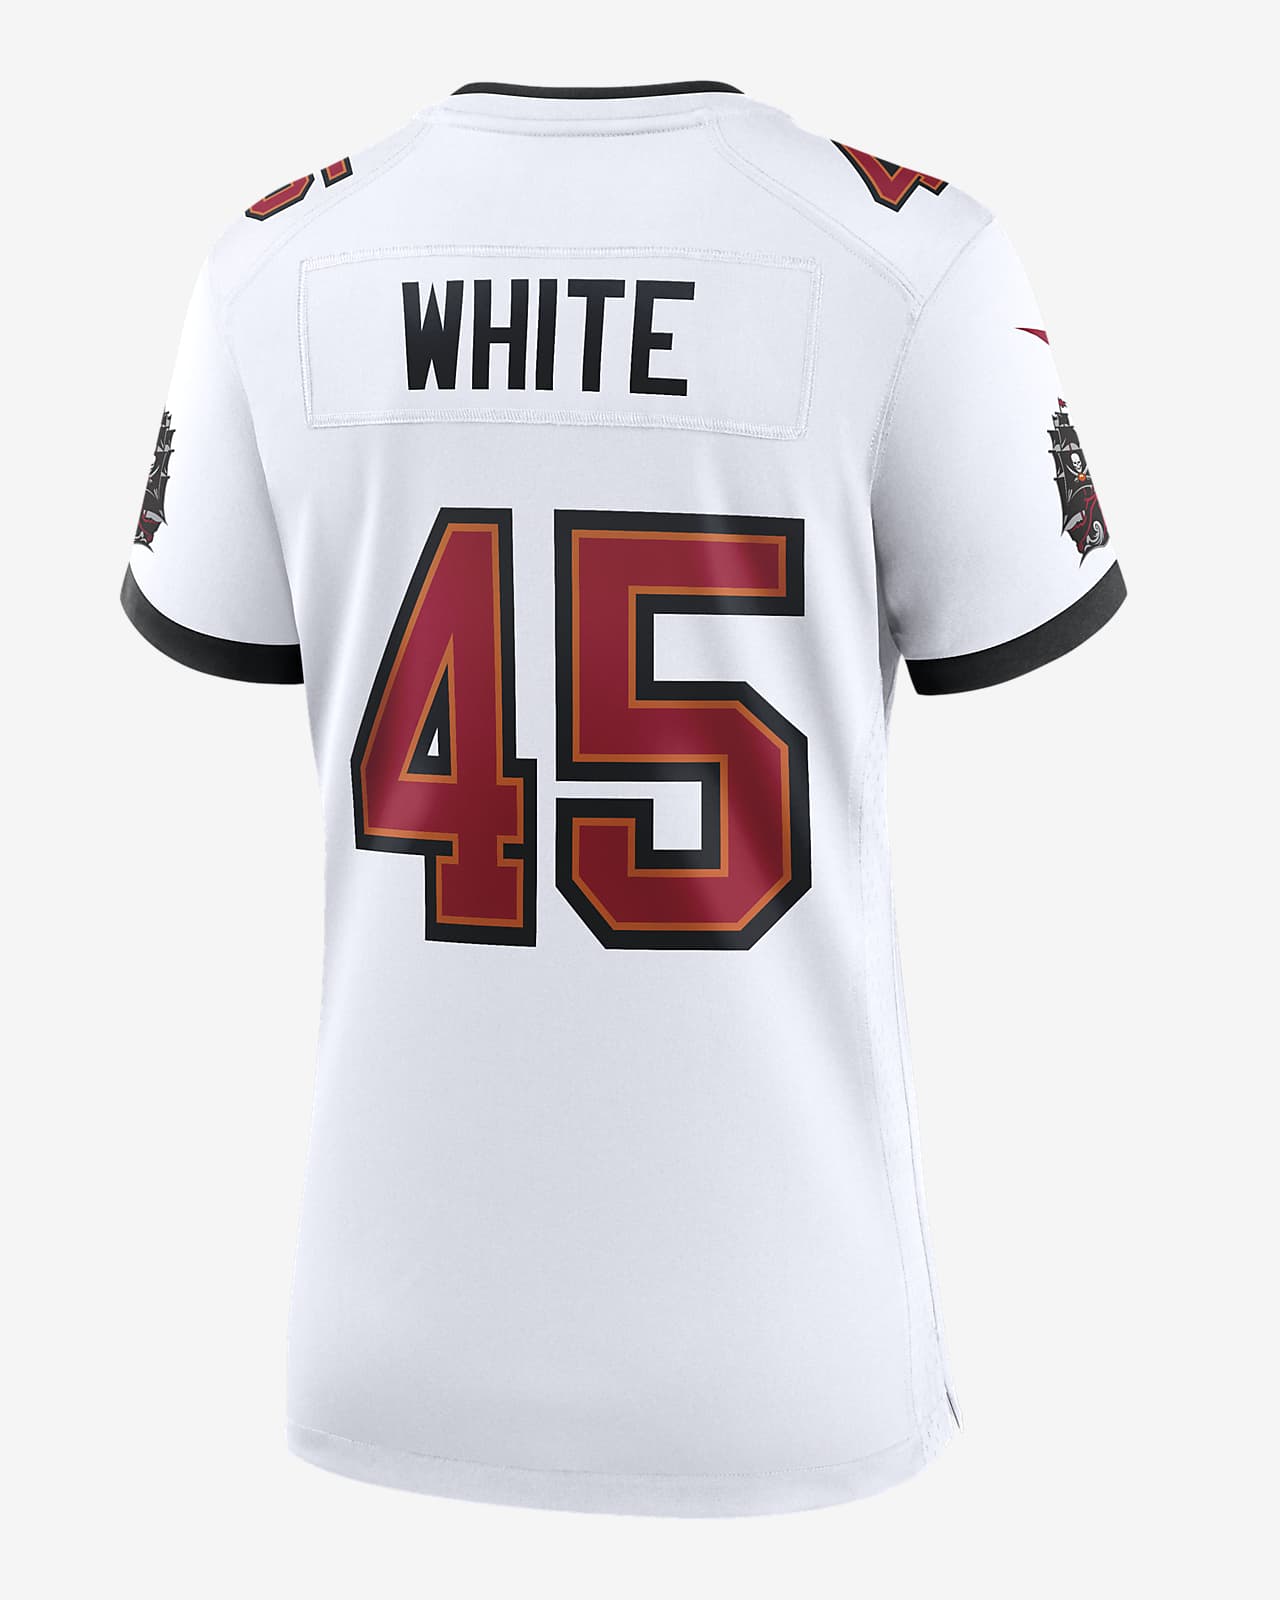 NFL Tampa Bay Buccaneers (Devin White) Women's Game Football Jersey